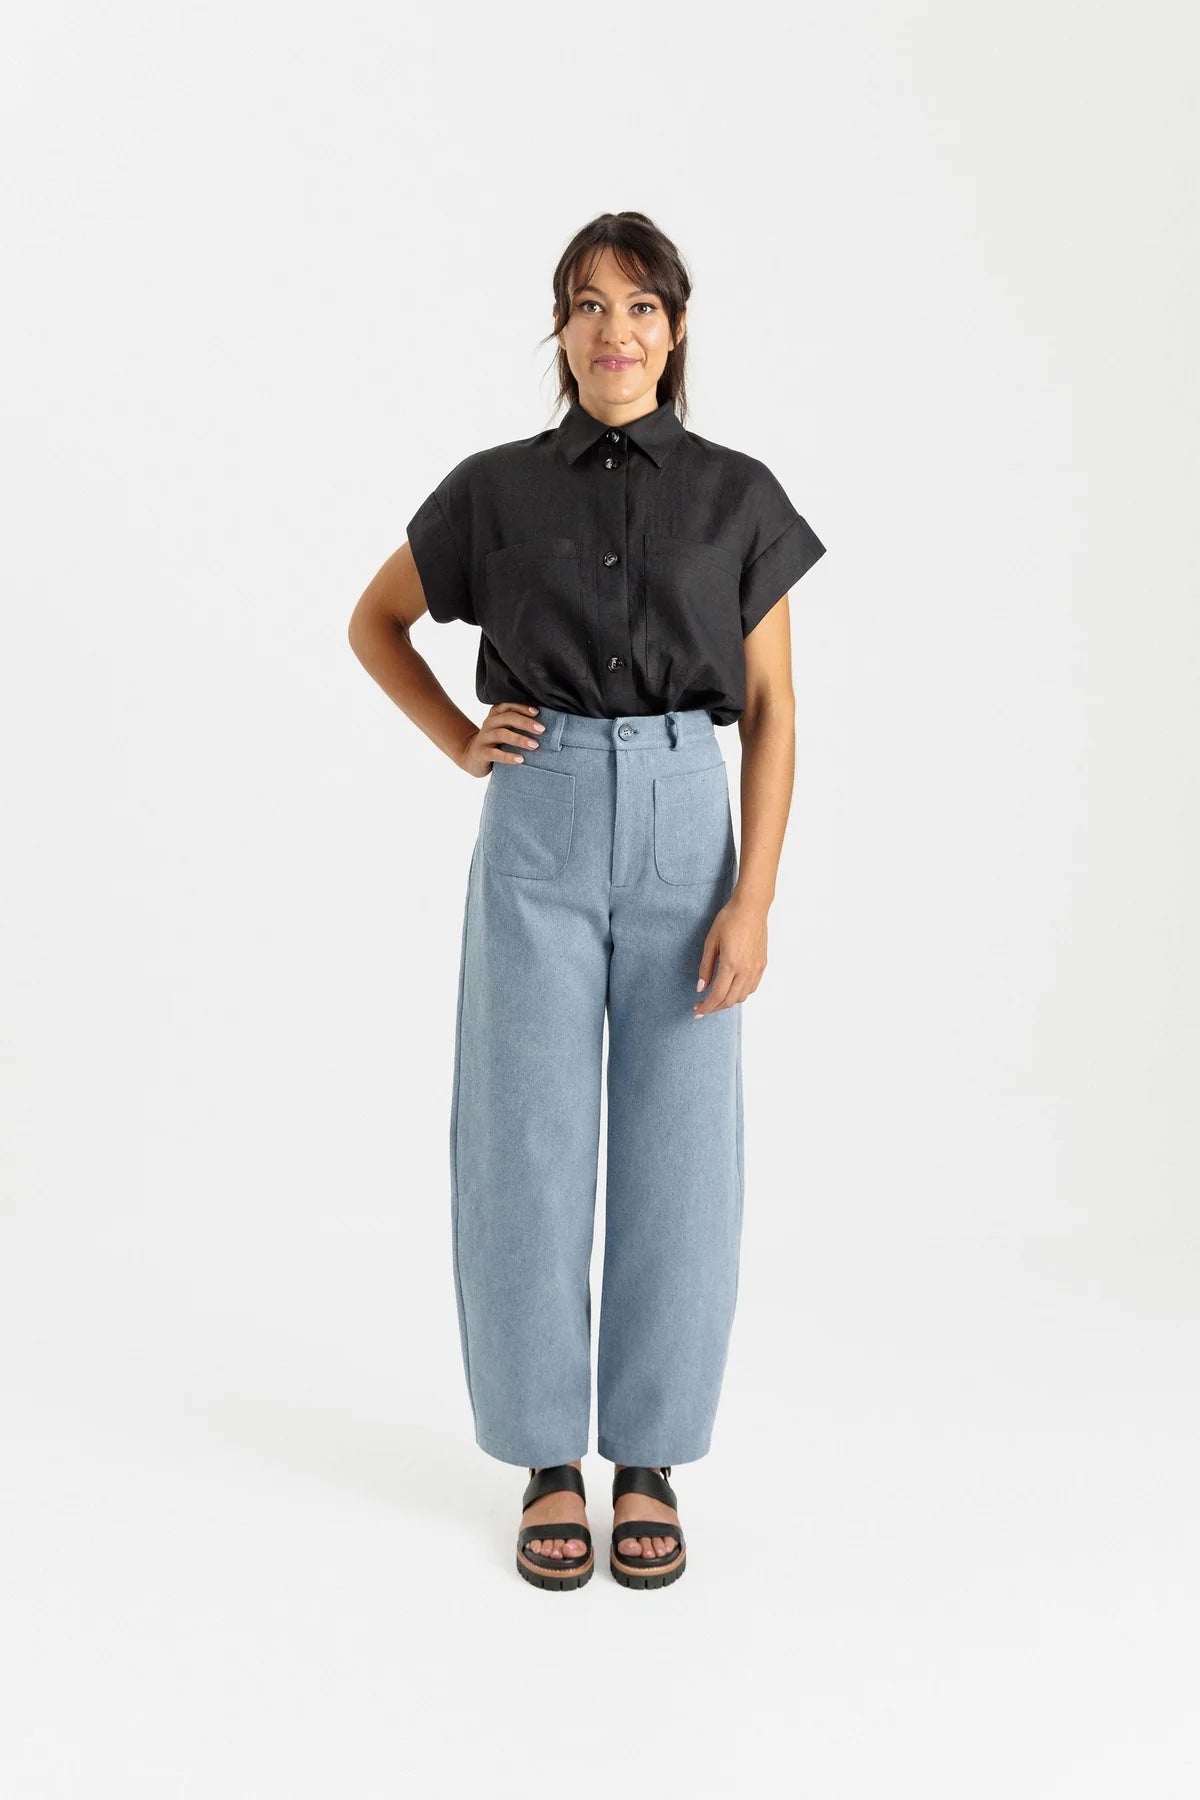 Woman wearing the Sera Pant sewing pattern from Papercut Patterns on The Fold Line. A pants pattern made in cotton drill, denim, canvas, or linen fabric, featuring a high waist, fly front, barrel leg, and rounded front pockets.